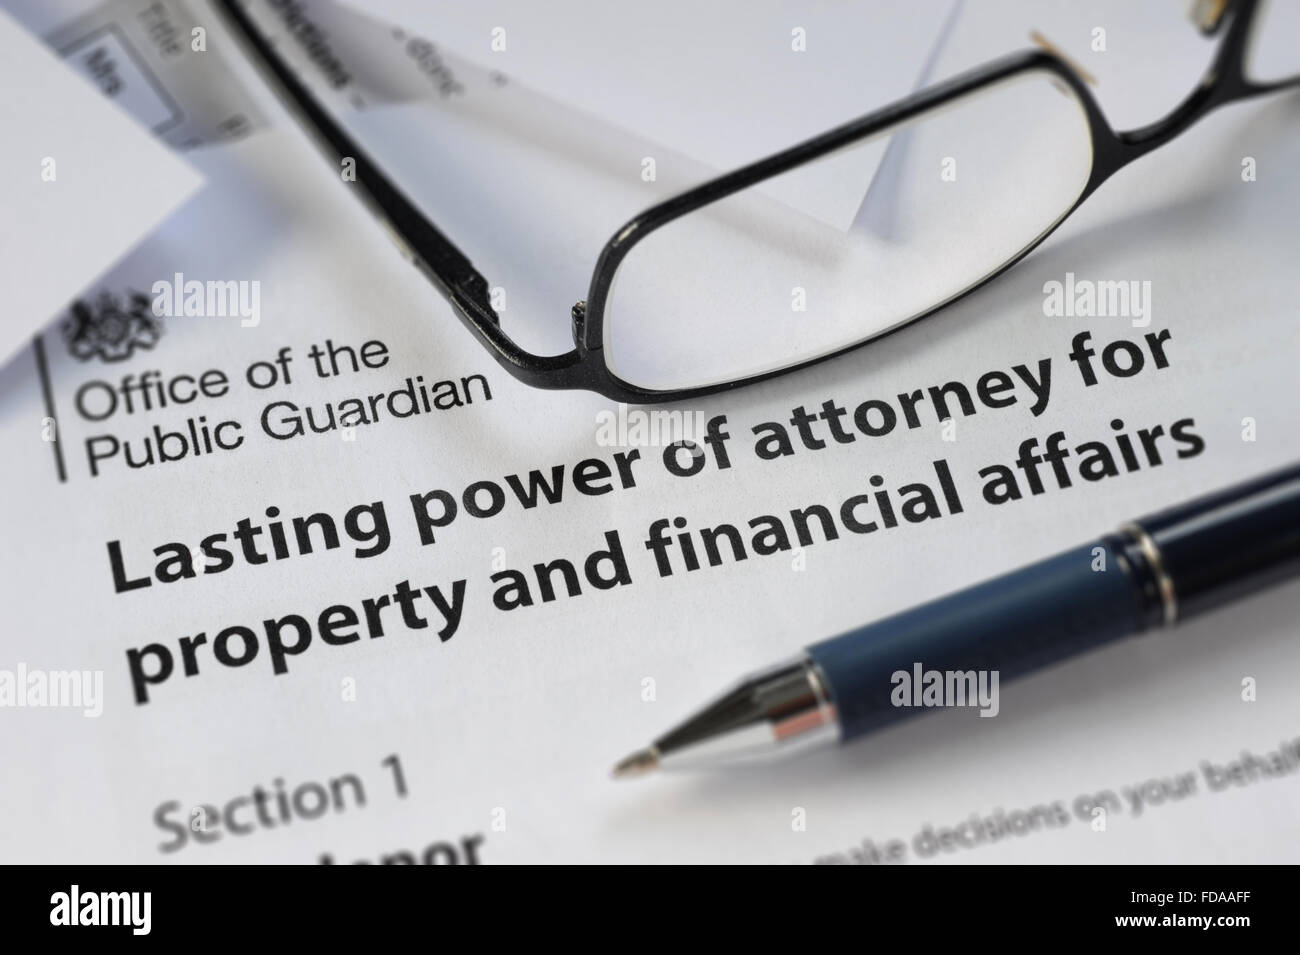 LASTING POWER OF ATTORNEY FORM WITH SPECTACLES PEN RE PROPERTY FINANCIAL AFFAIRS LEAVING A  WILL WILLS LEGACY TESTAMENT DEATH UK Stock Photo